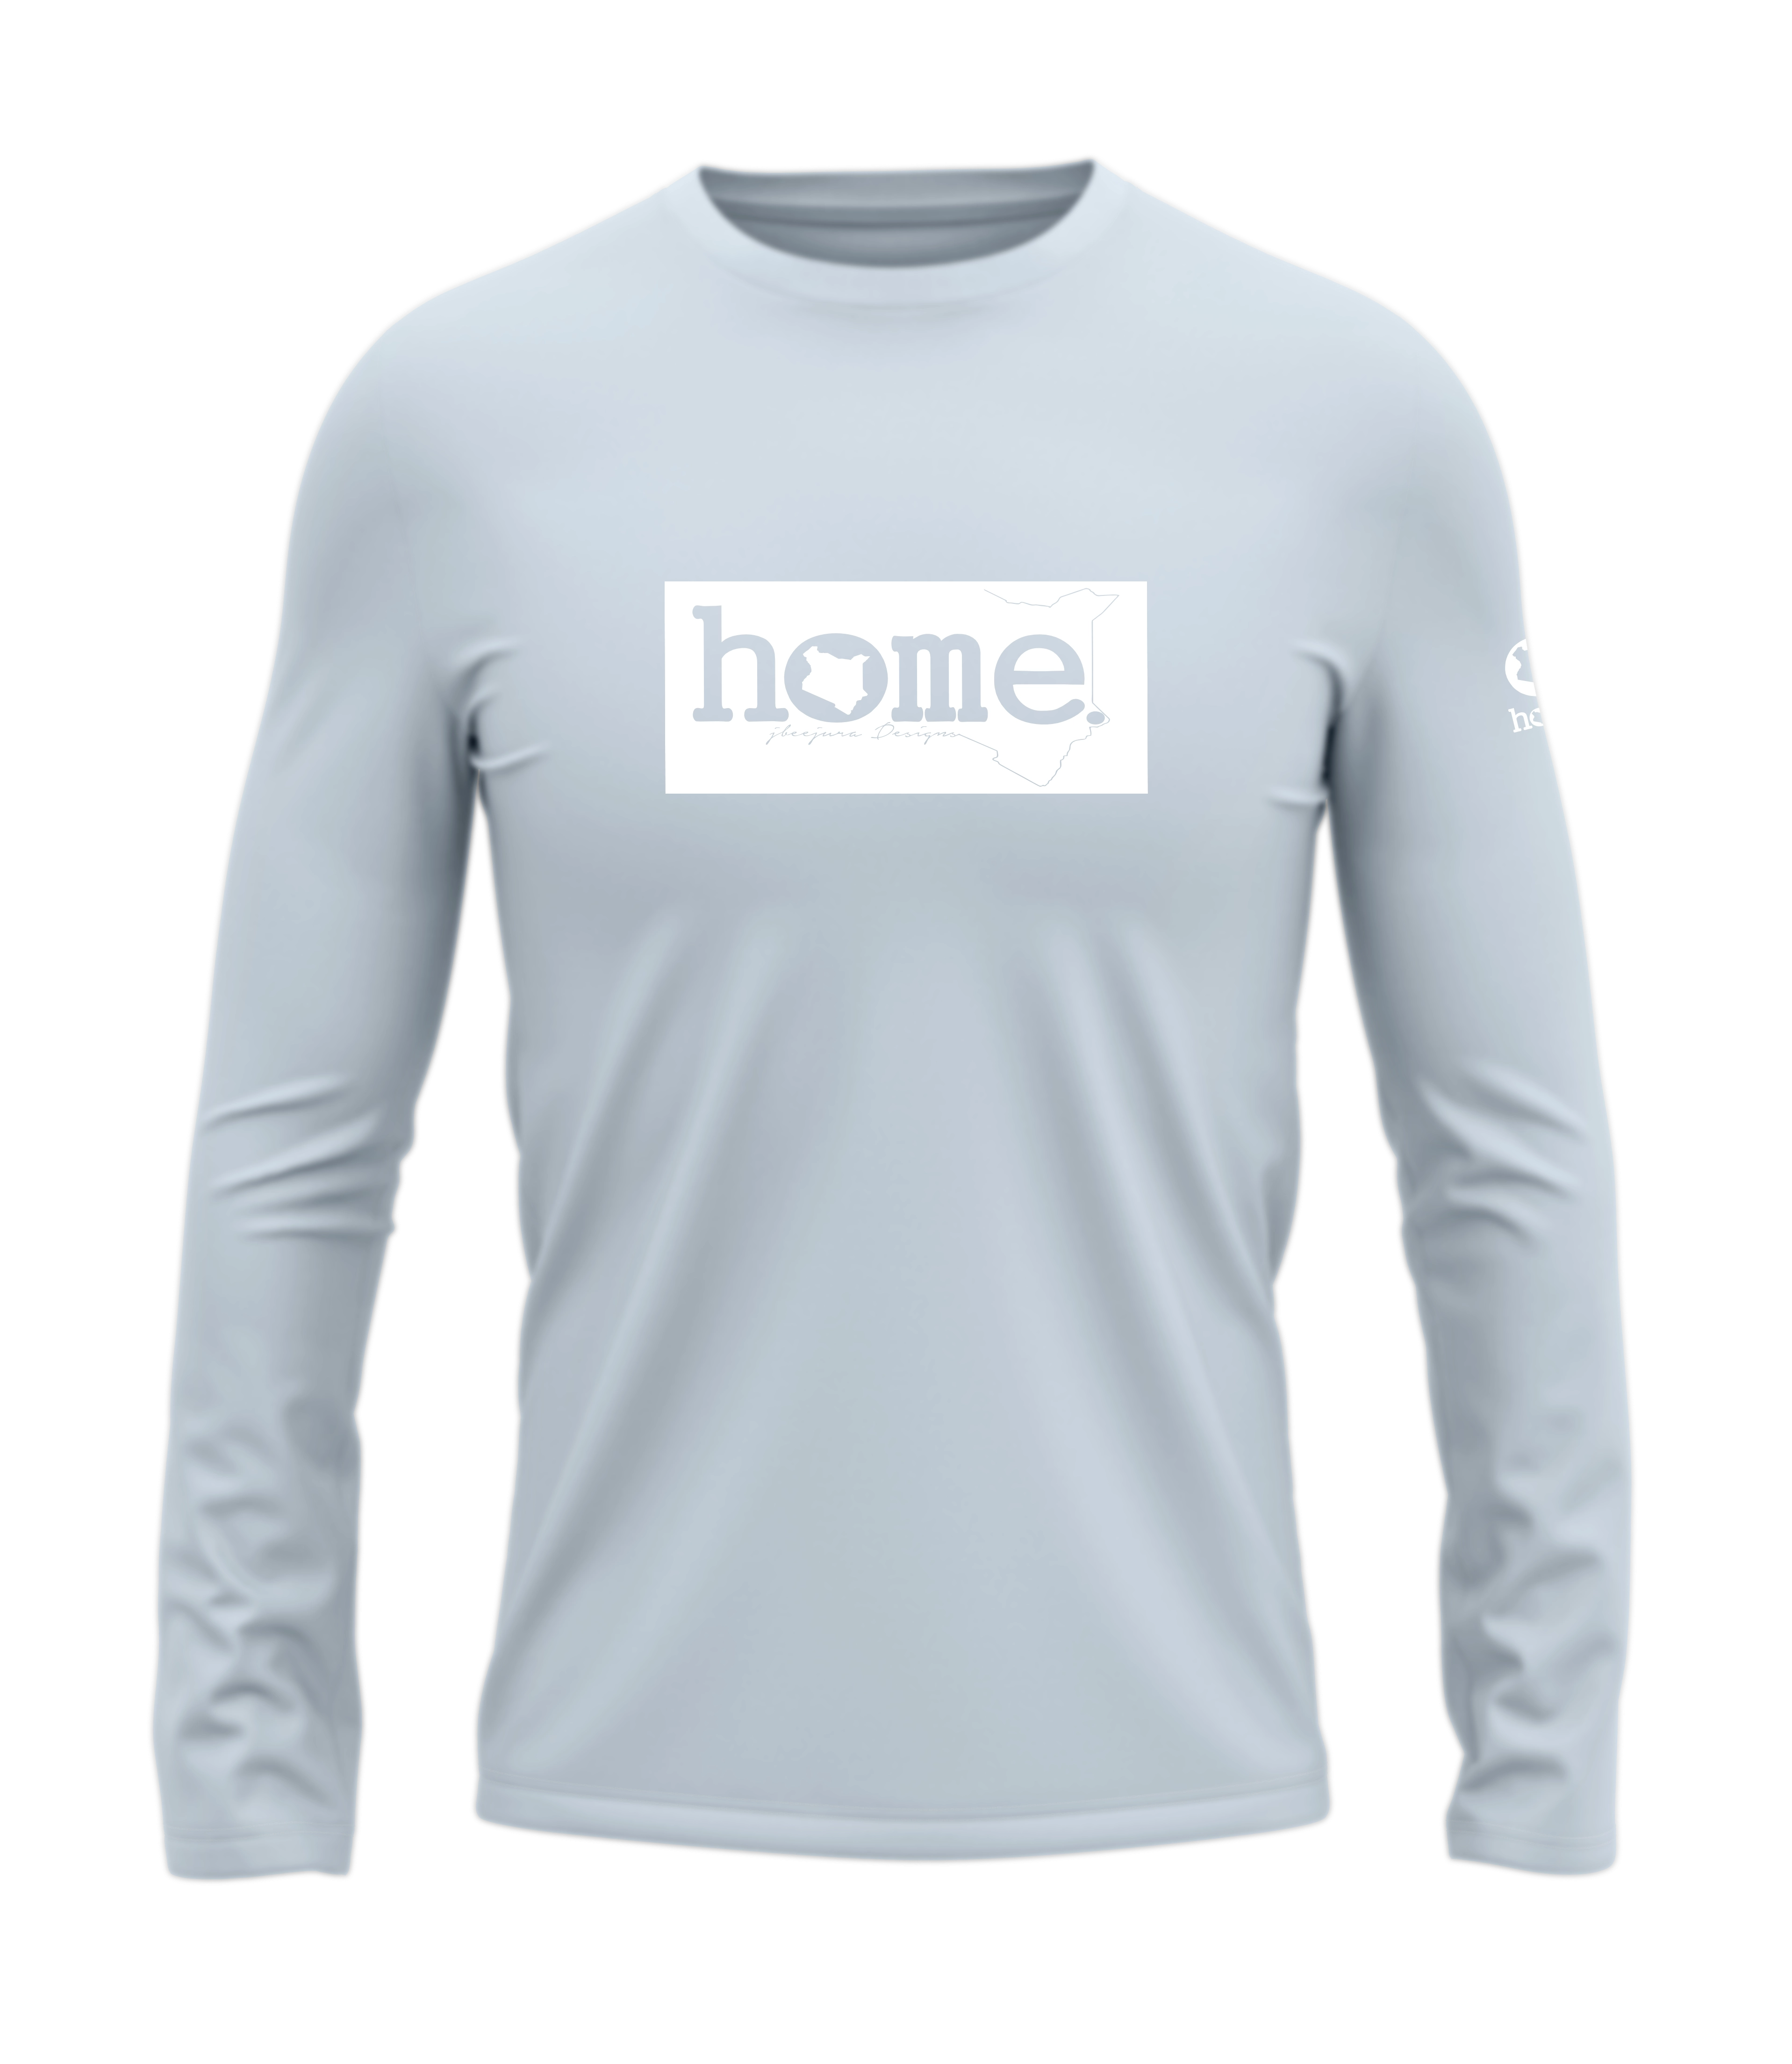 home_254 LONG-SLEEVED SKY-BLUE T-SHIRT WITH A WHITE CLASSIC PRINT – COTTON PLUS FABRIC